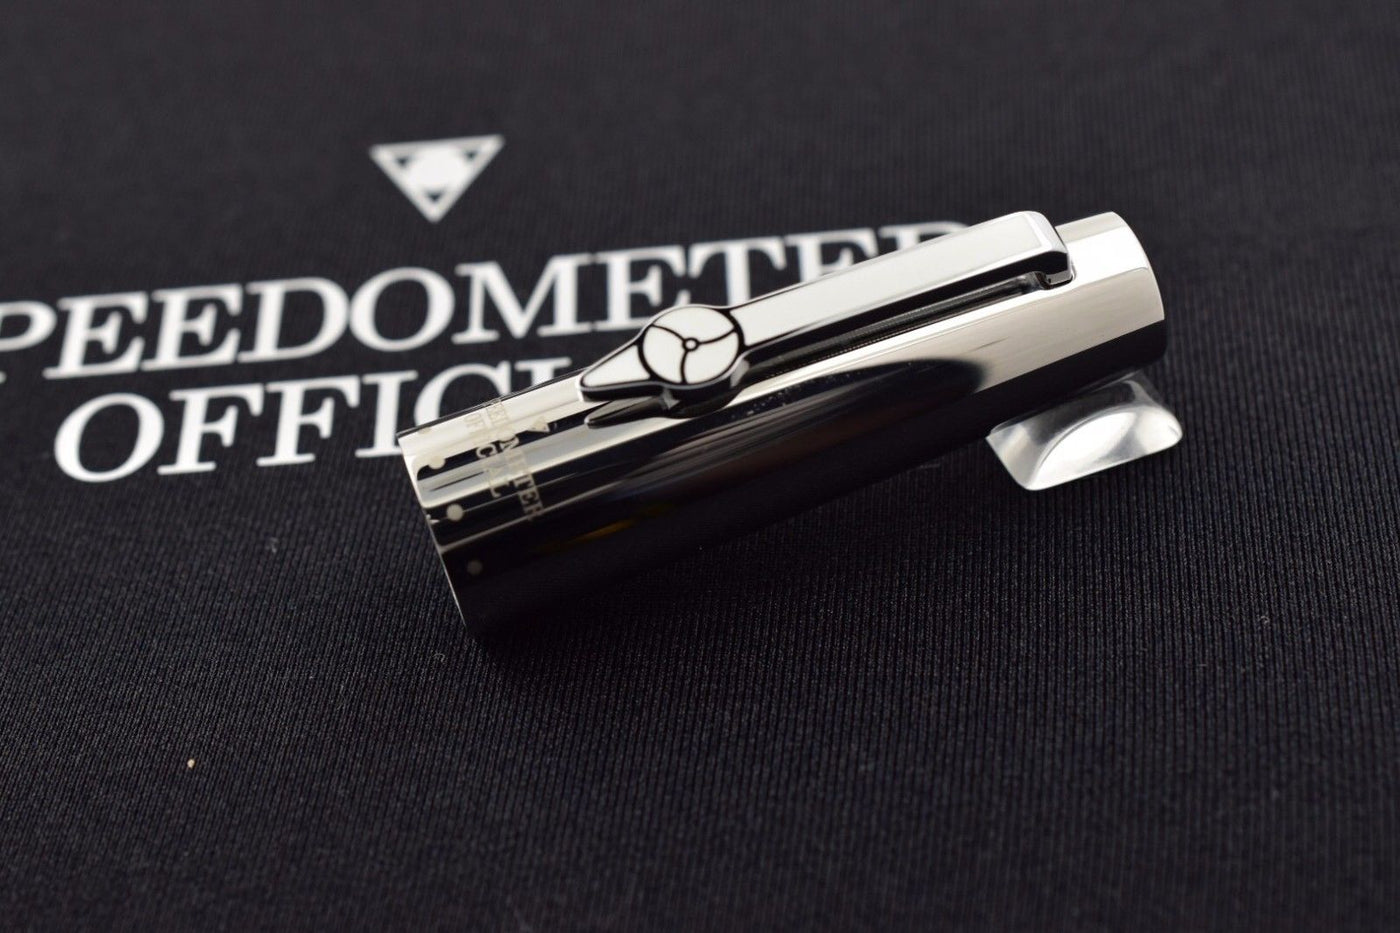 Speedometer Official Silver Steel with Black & White Spare Ring Fountain Pen-Speedometer Official-Truphae